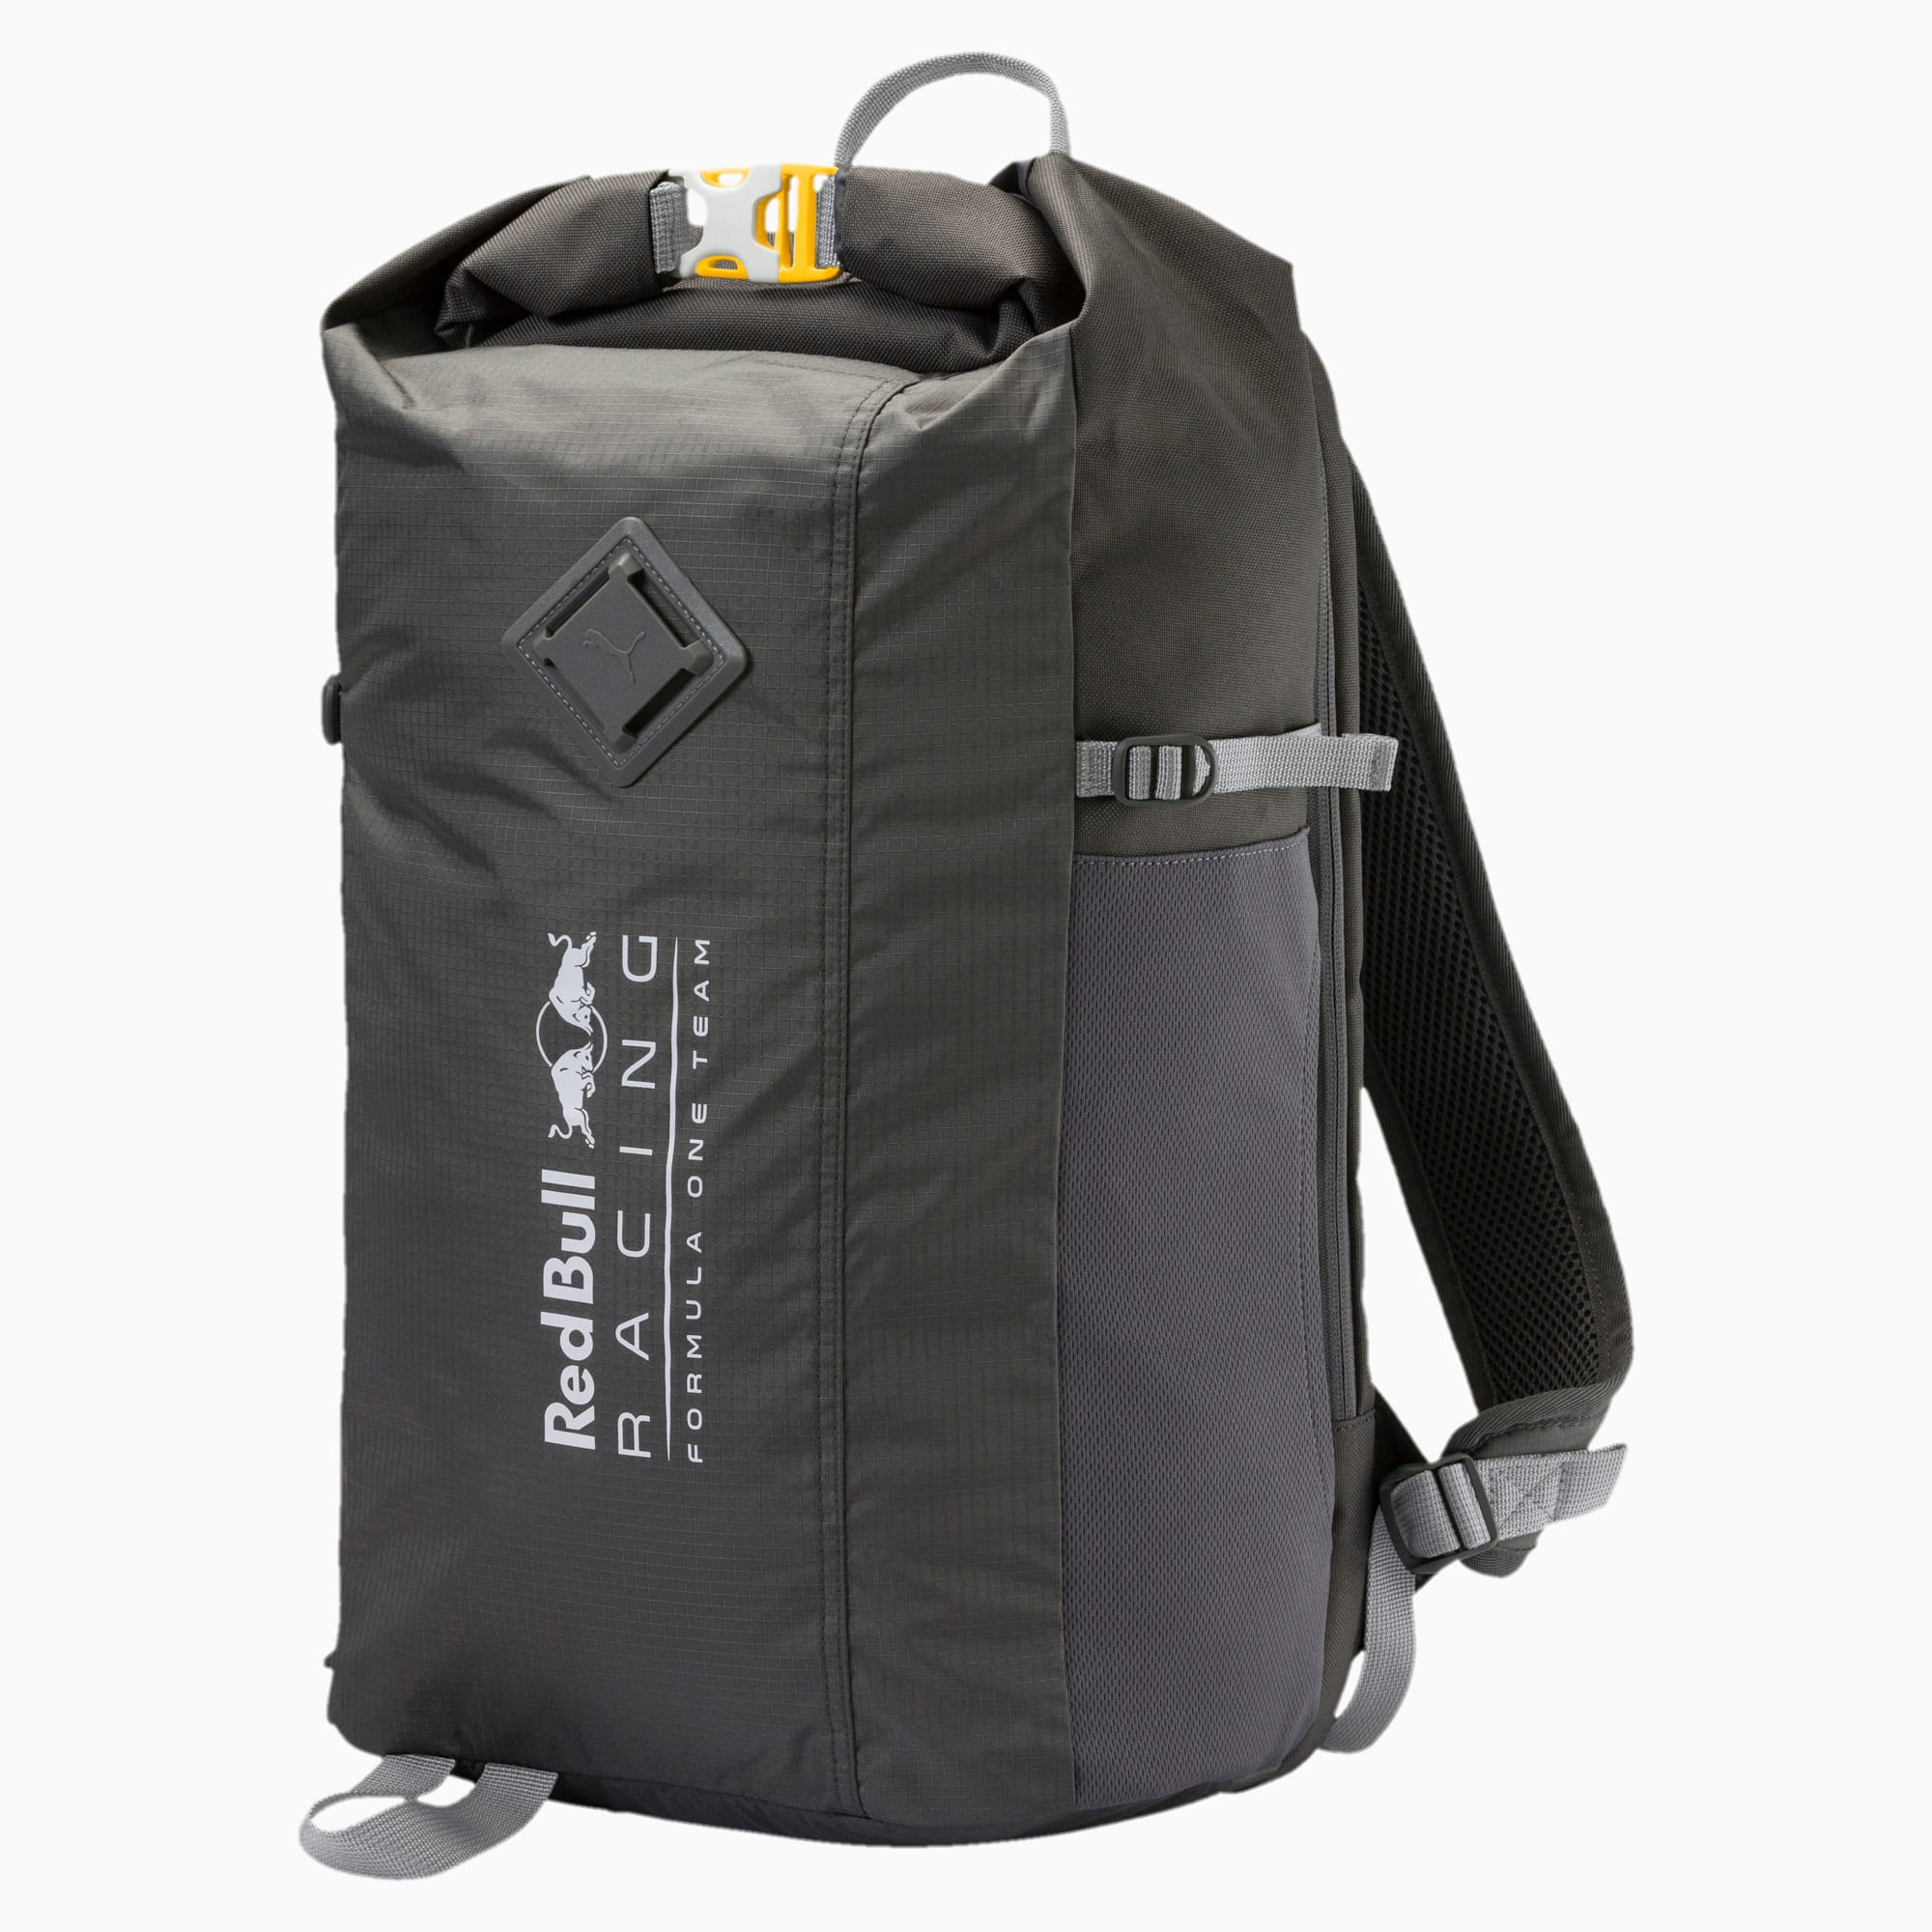 puma red bull racing lifestyle backpack